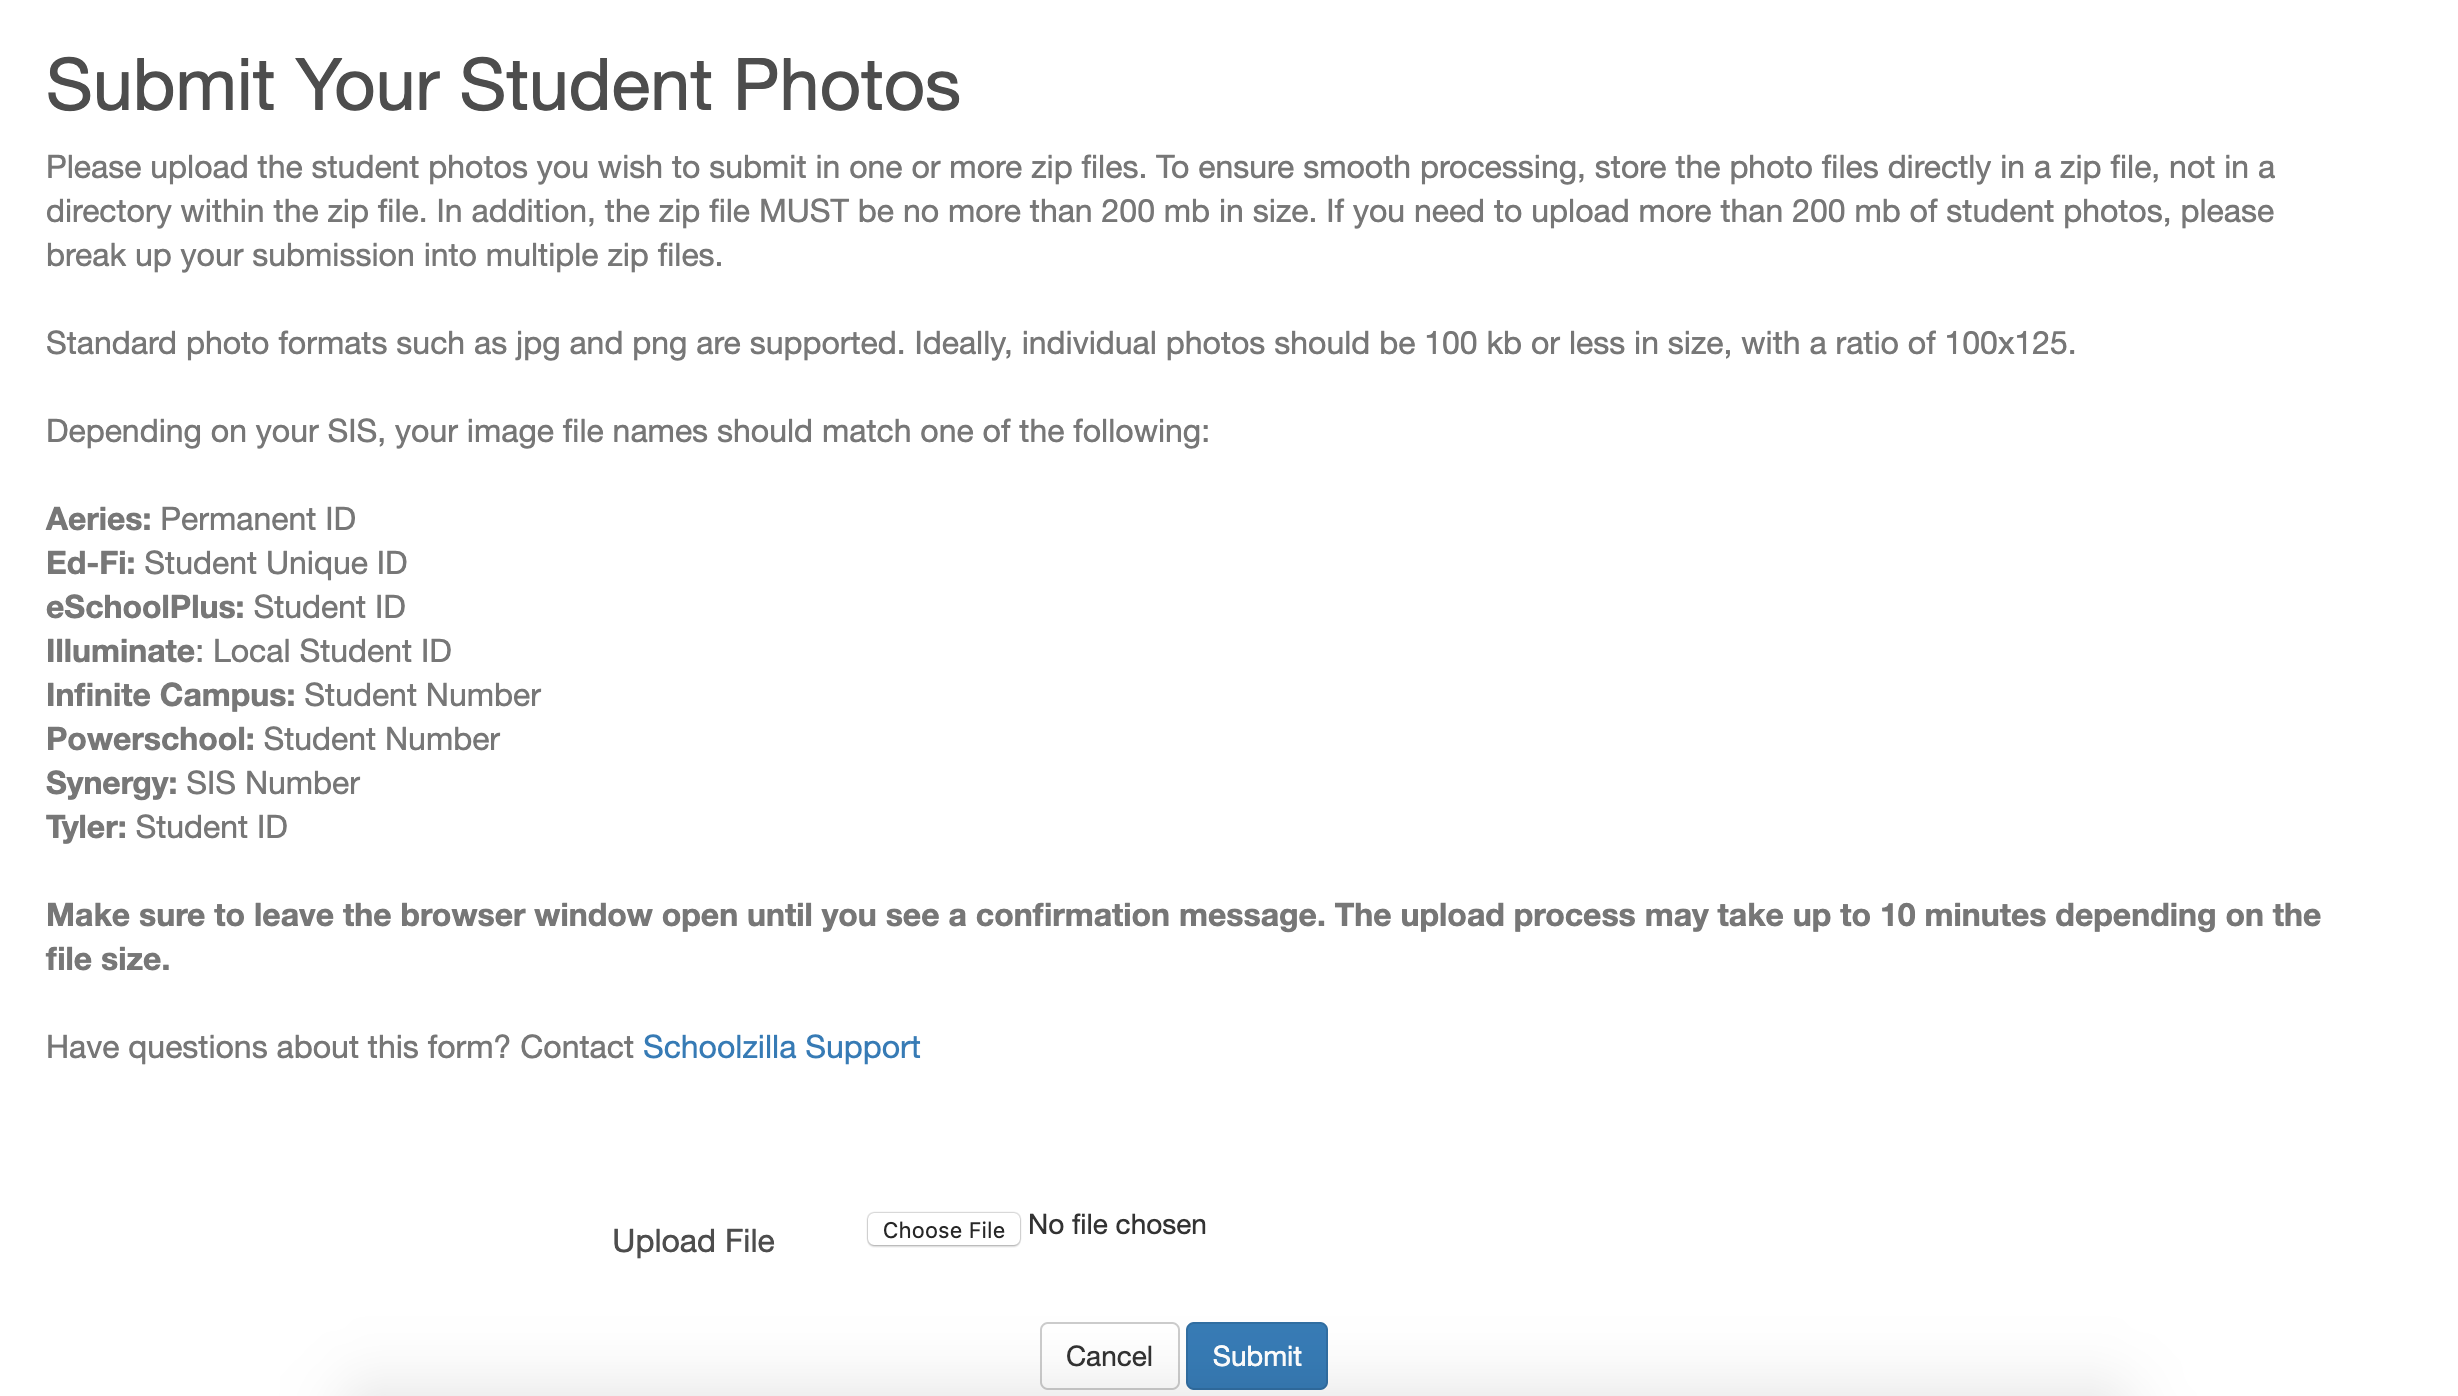 Submit Your Student Photos page